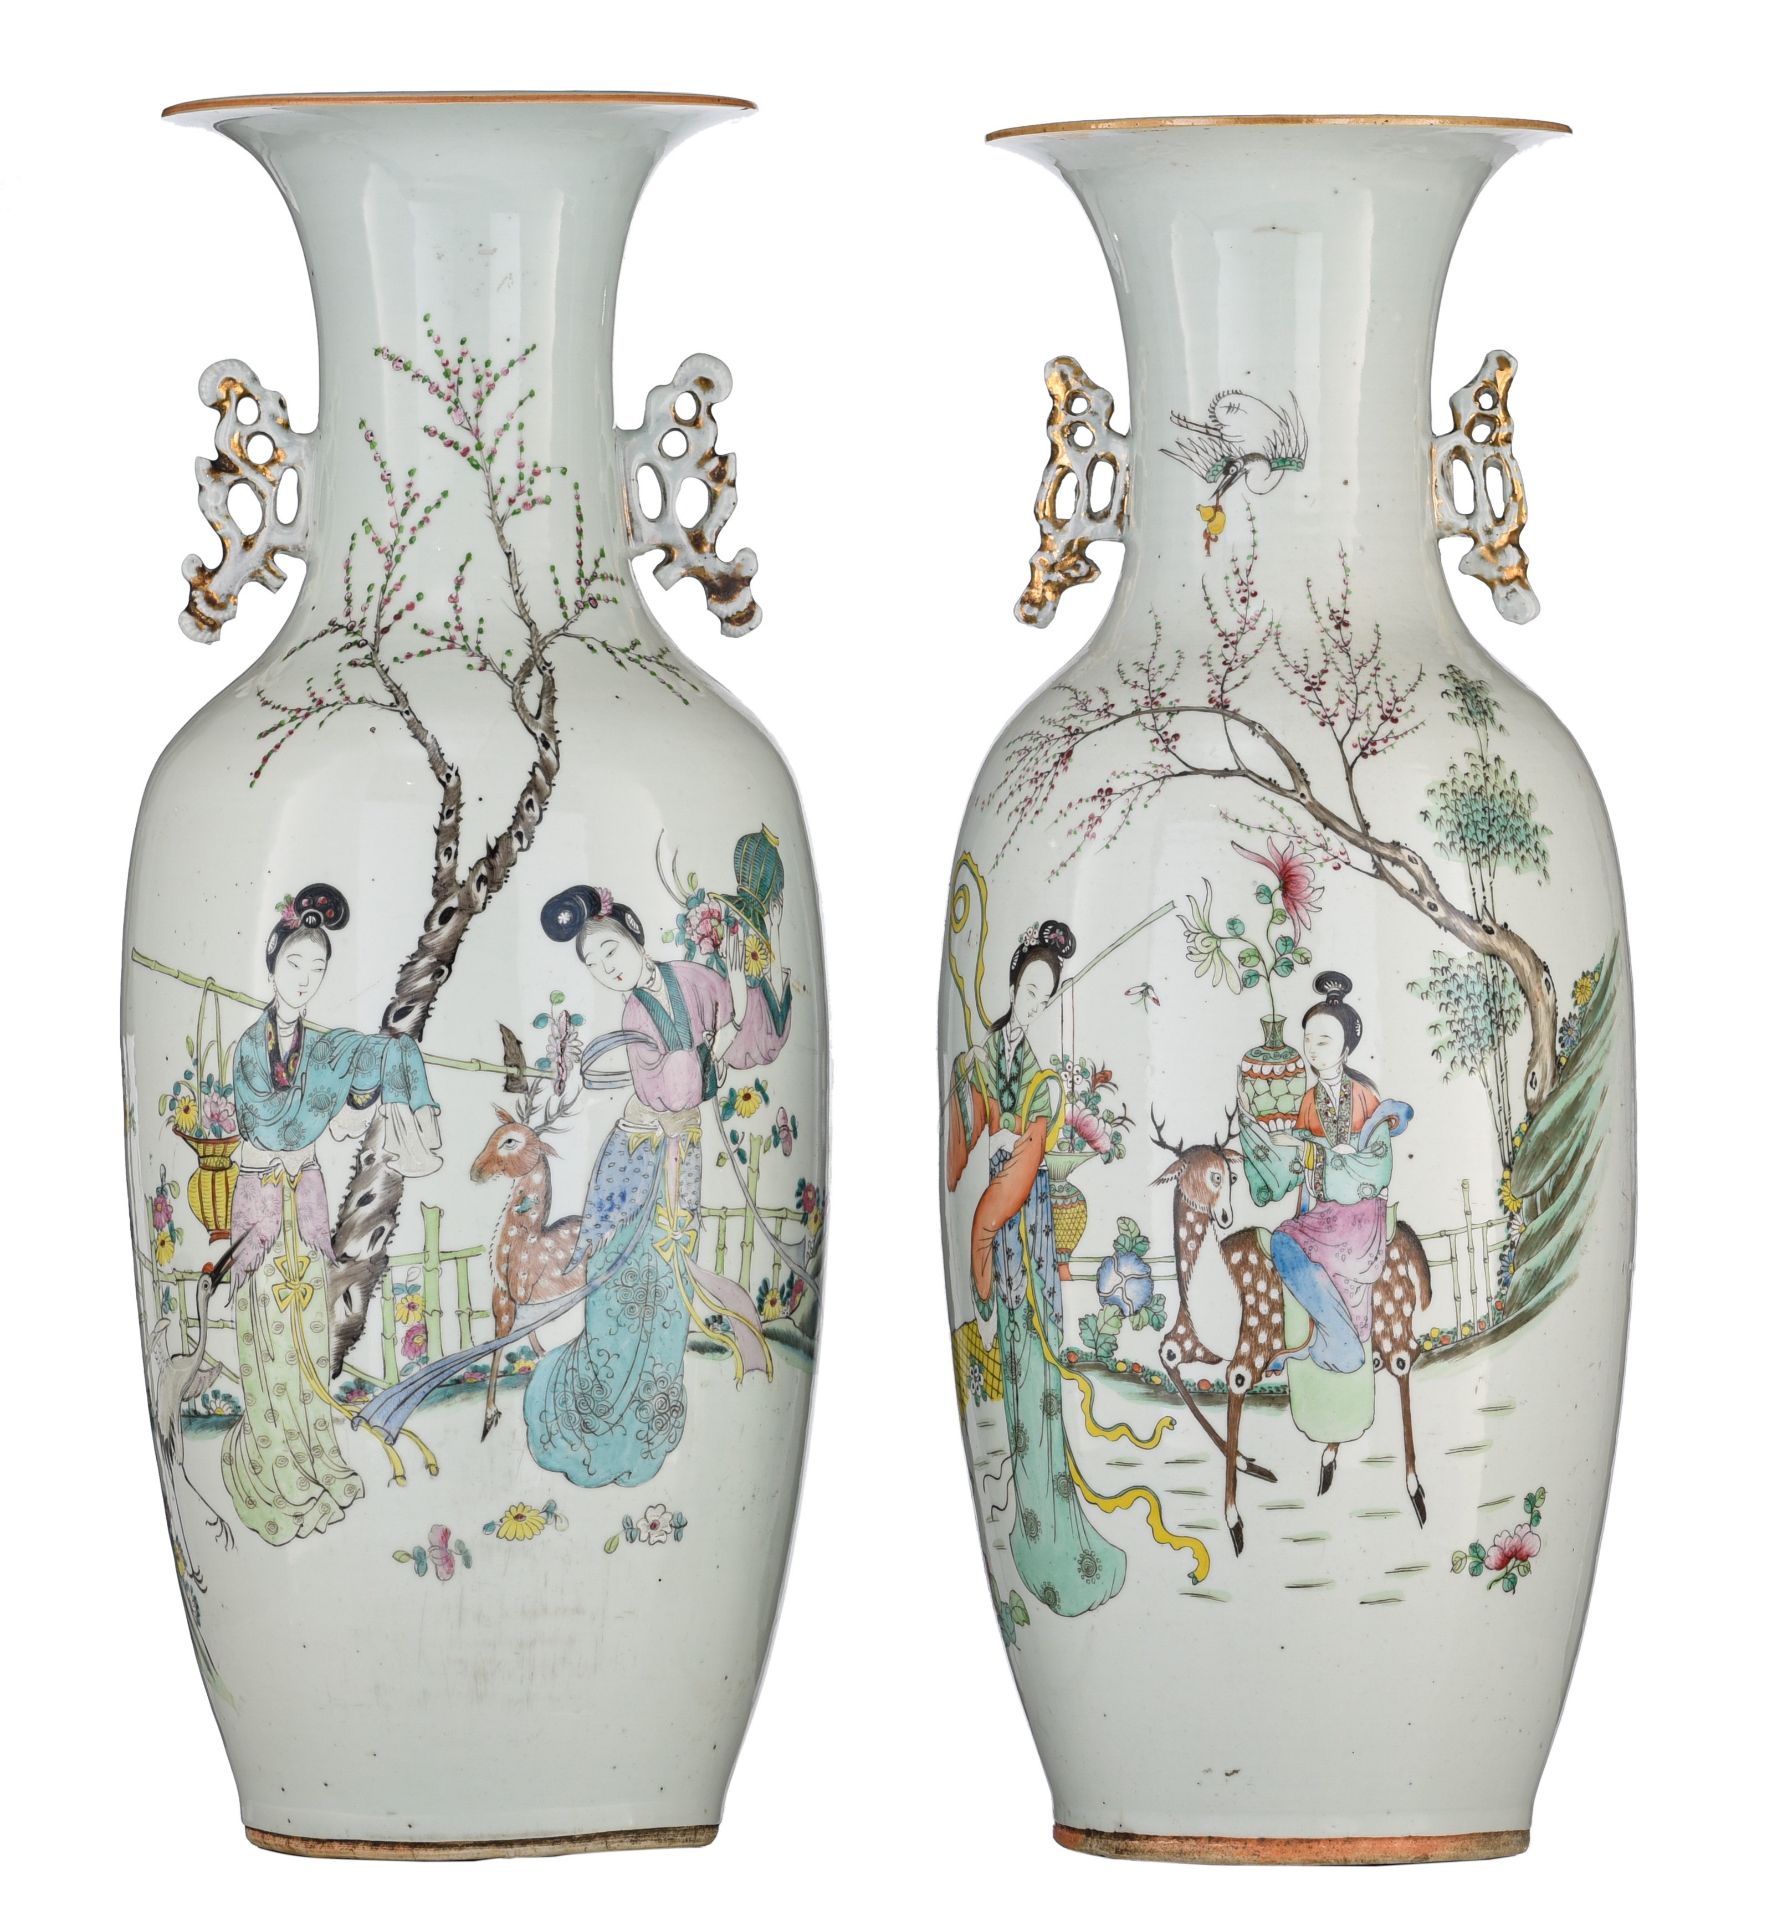 Two Chinese famille rose 'Magu and the deer' vases, the back with a signed text, Republic period H 5